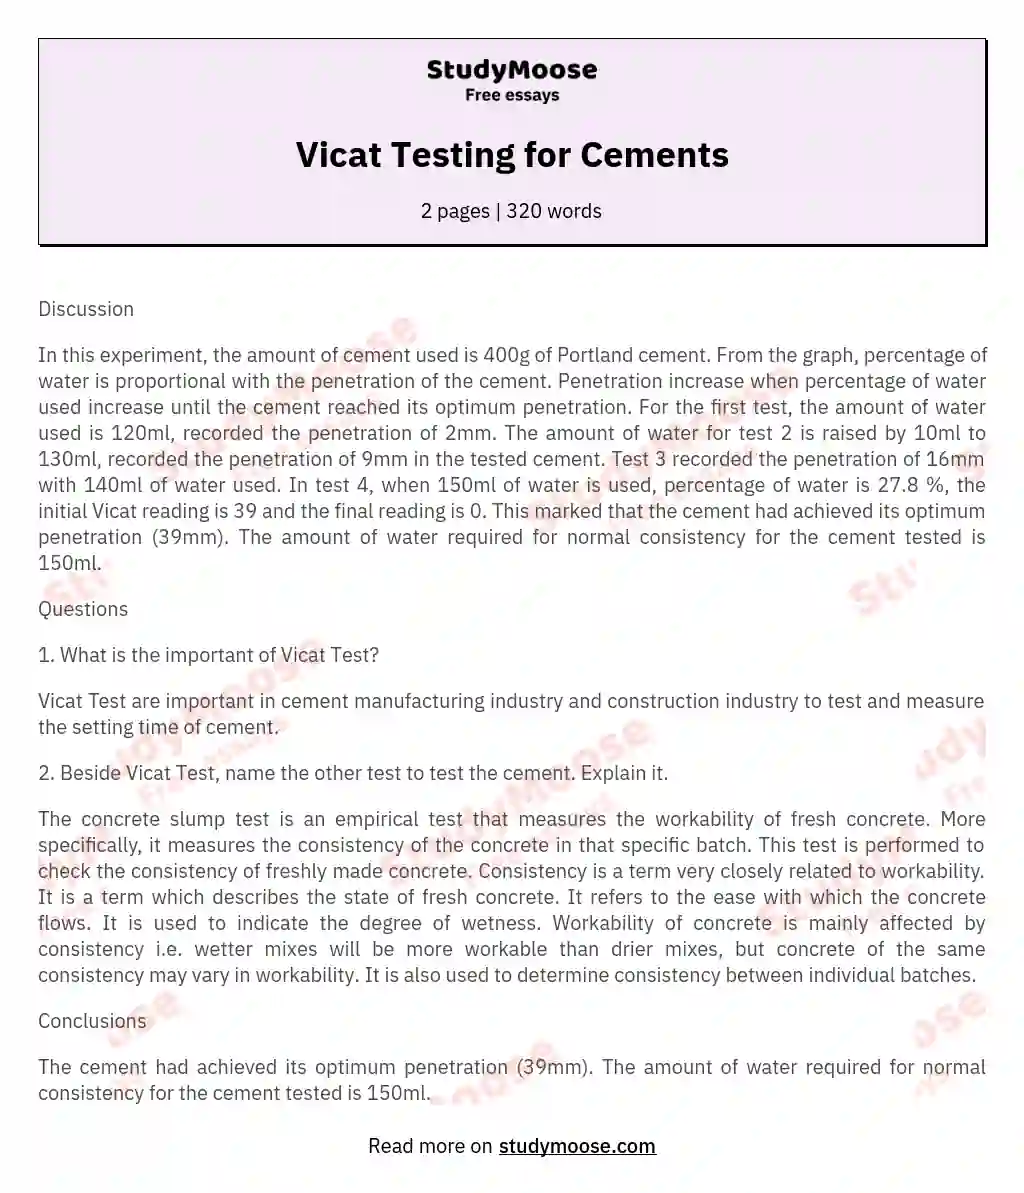 Vicat Testing for Cements essay